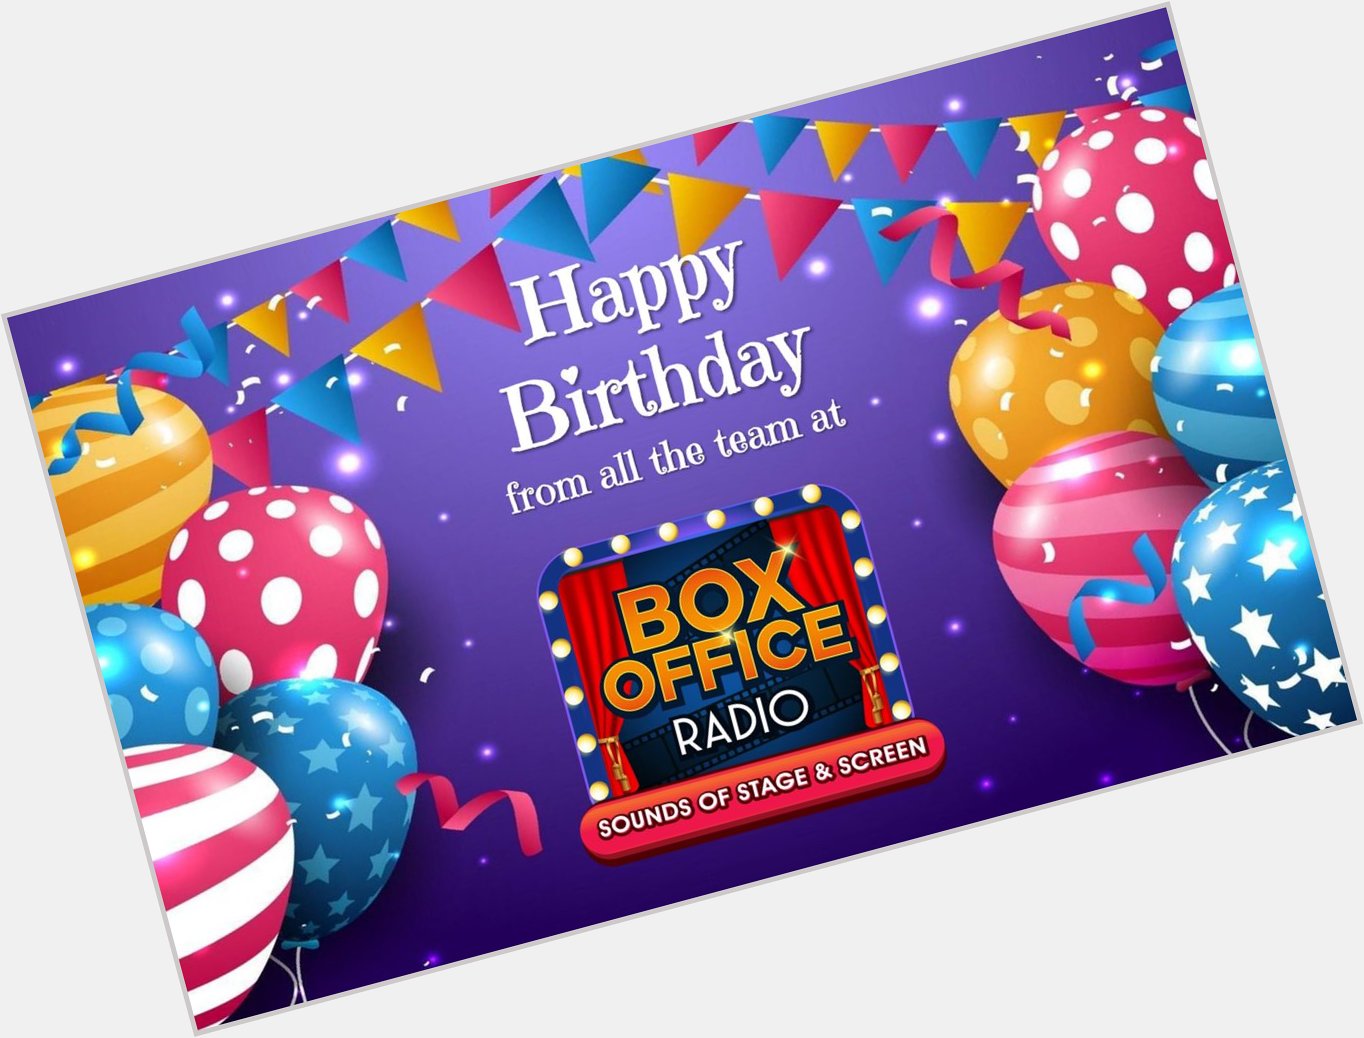 A big Happy Birthday to the wonderful from everyone here at Box Office Radio!  